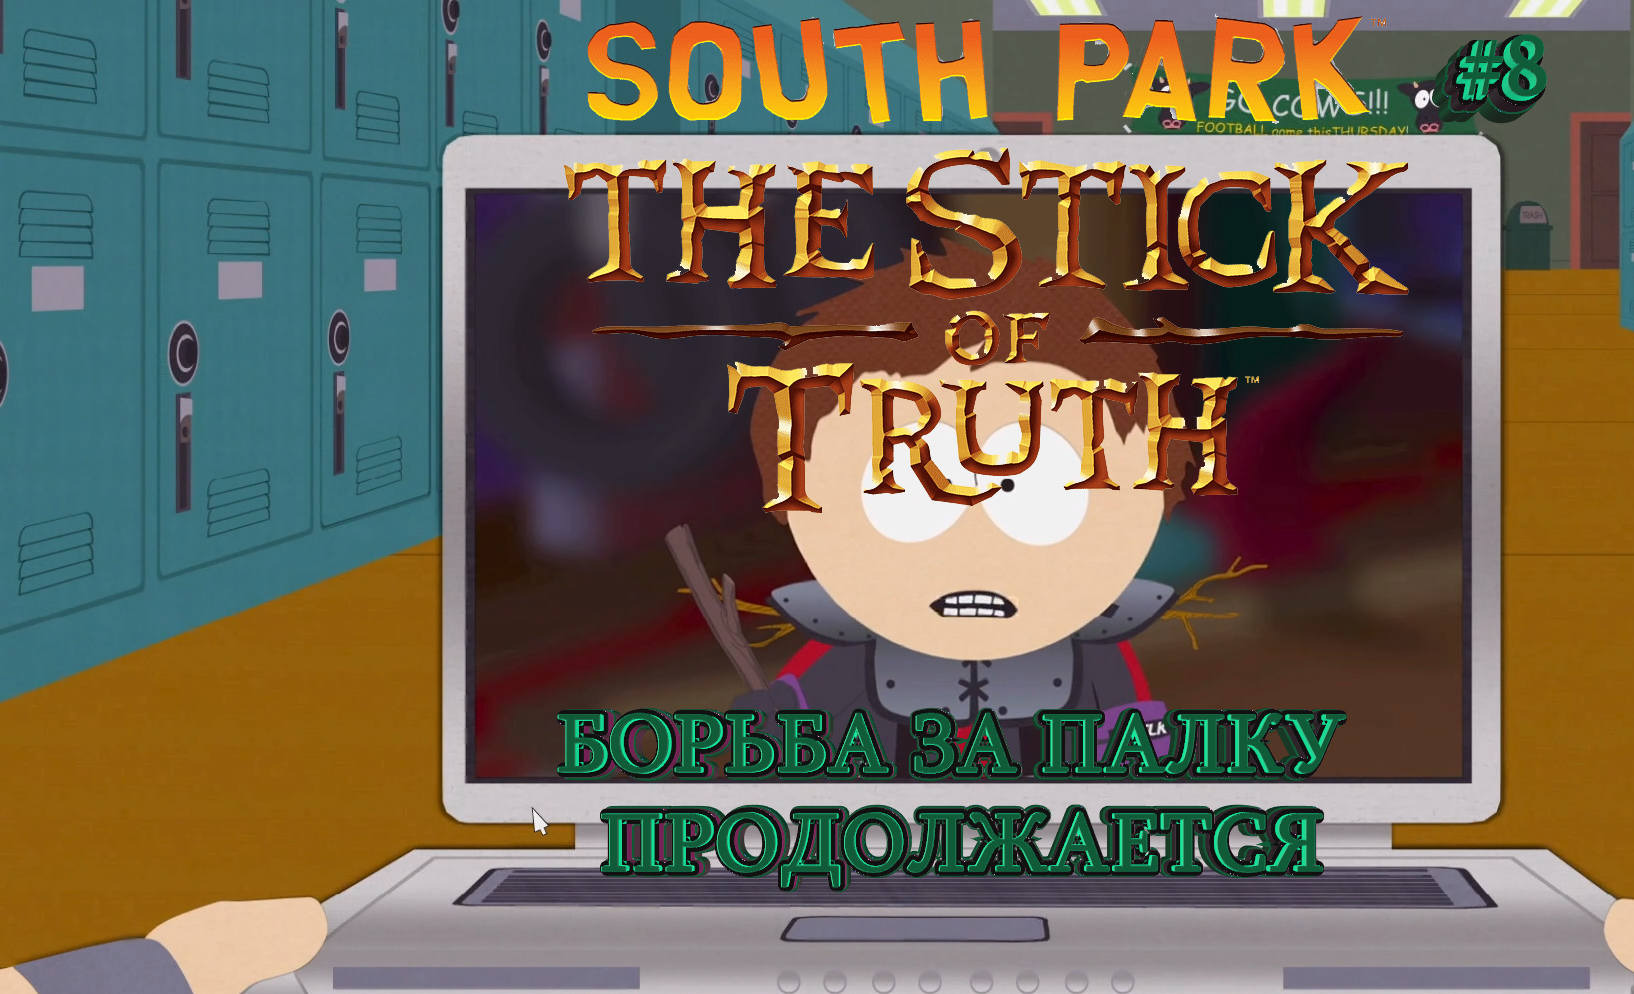 South Park: The Stick of Truth #8. БОРЬБА ЗА ПАЛКУ ПРОДОЛЖАЕТСЯ.